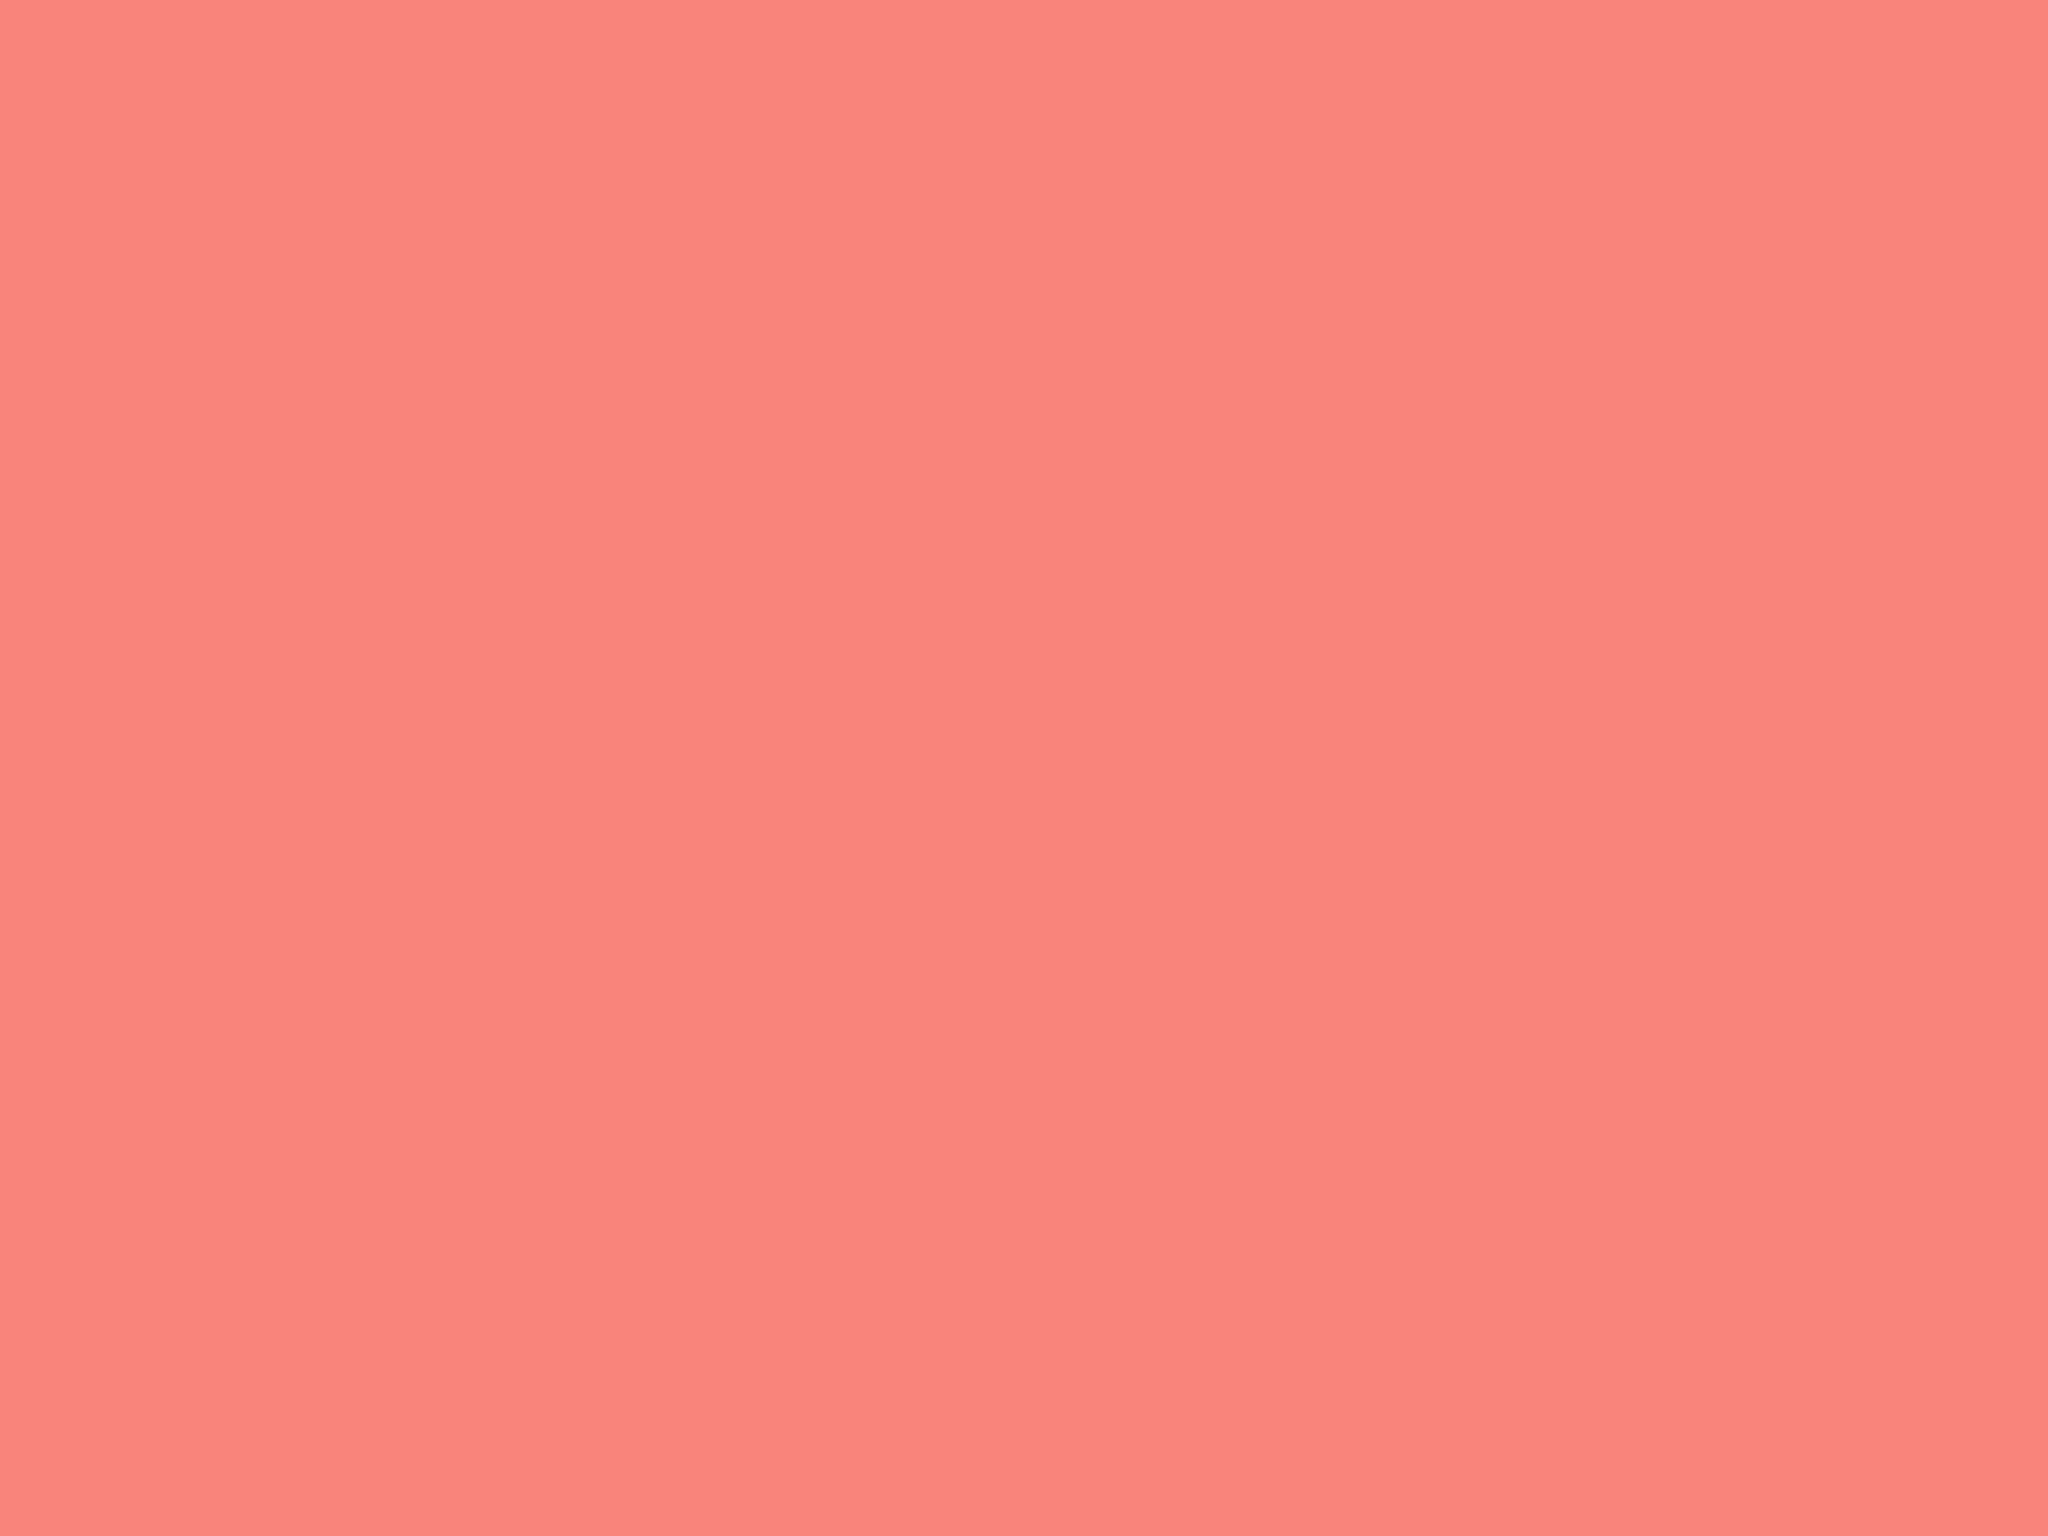 2048x1536 Coral Pink Solid Color Background